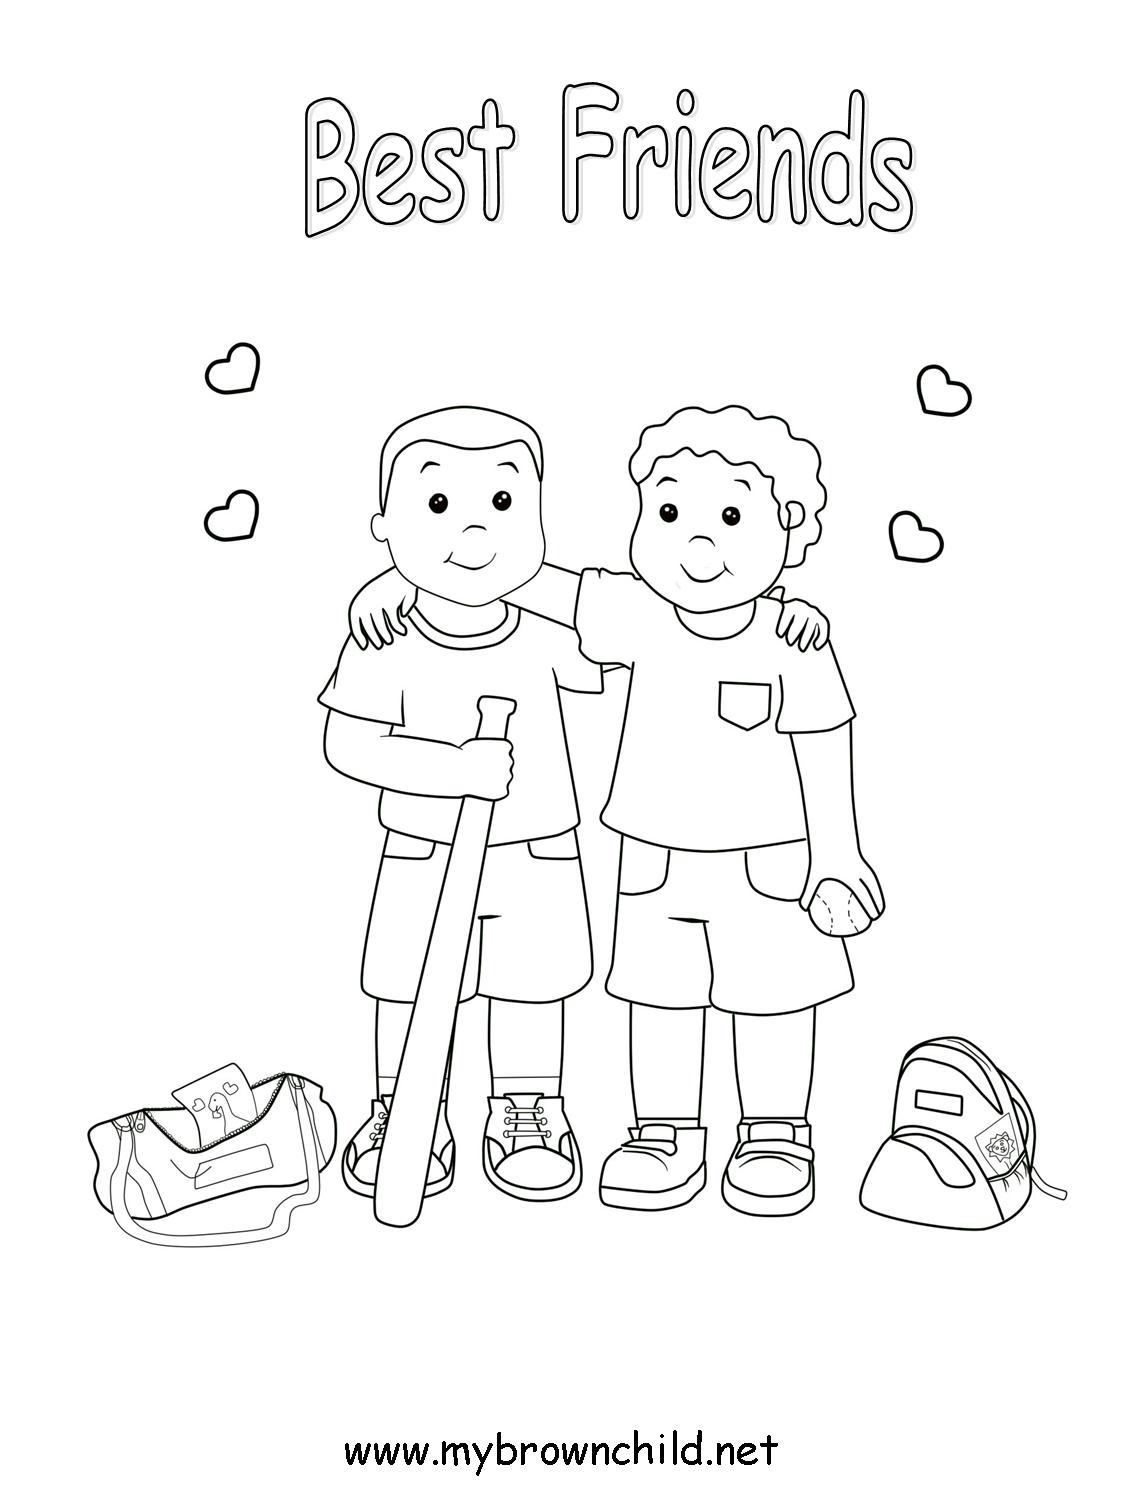 Coloring Pages For Friends - Coloring Home